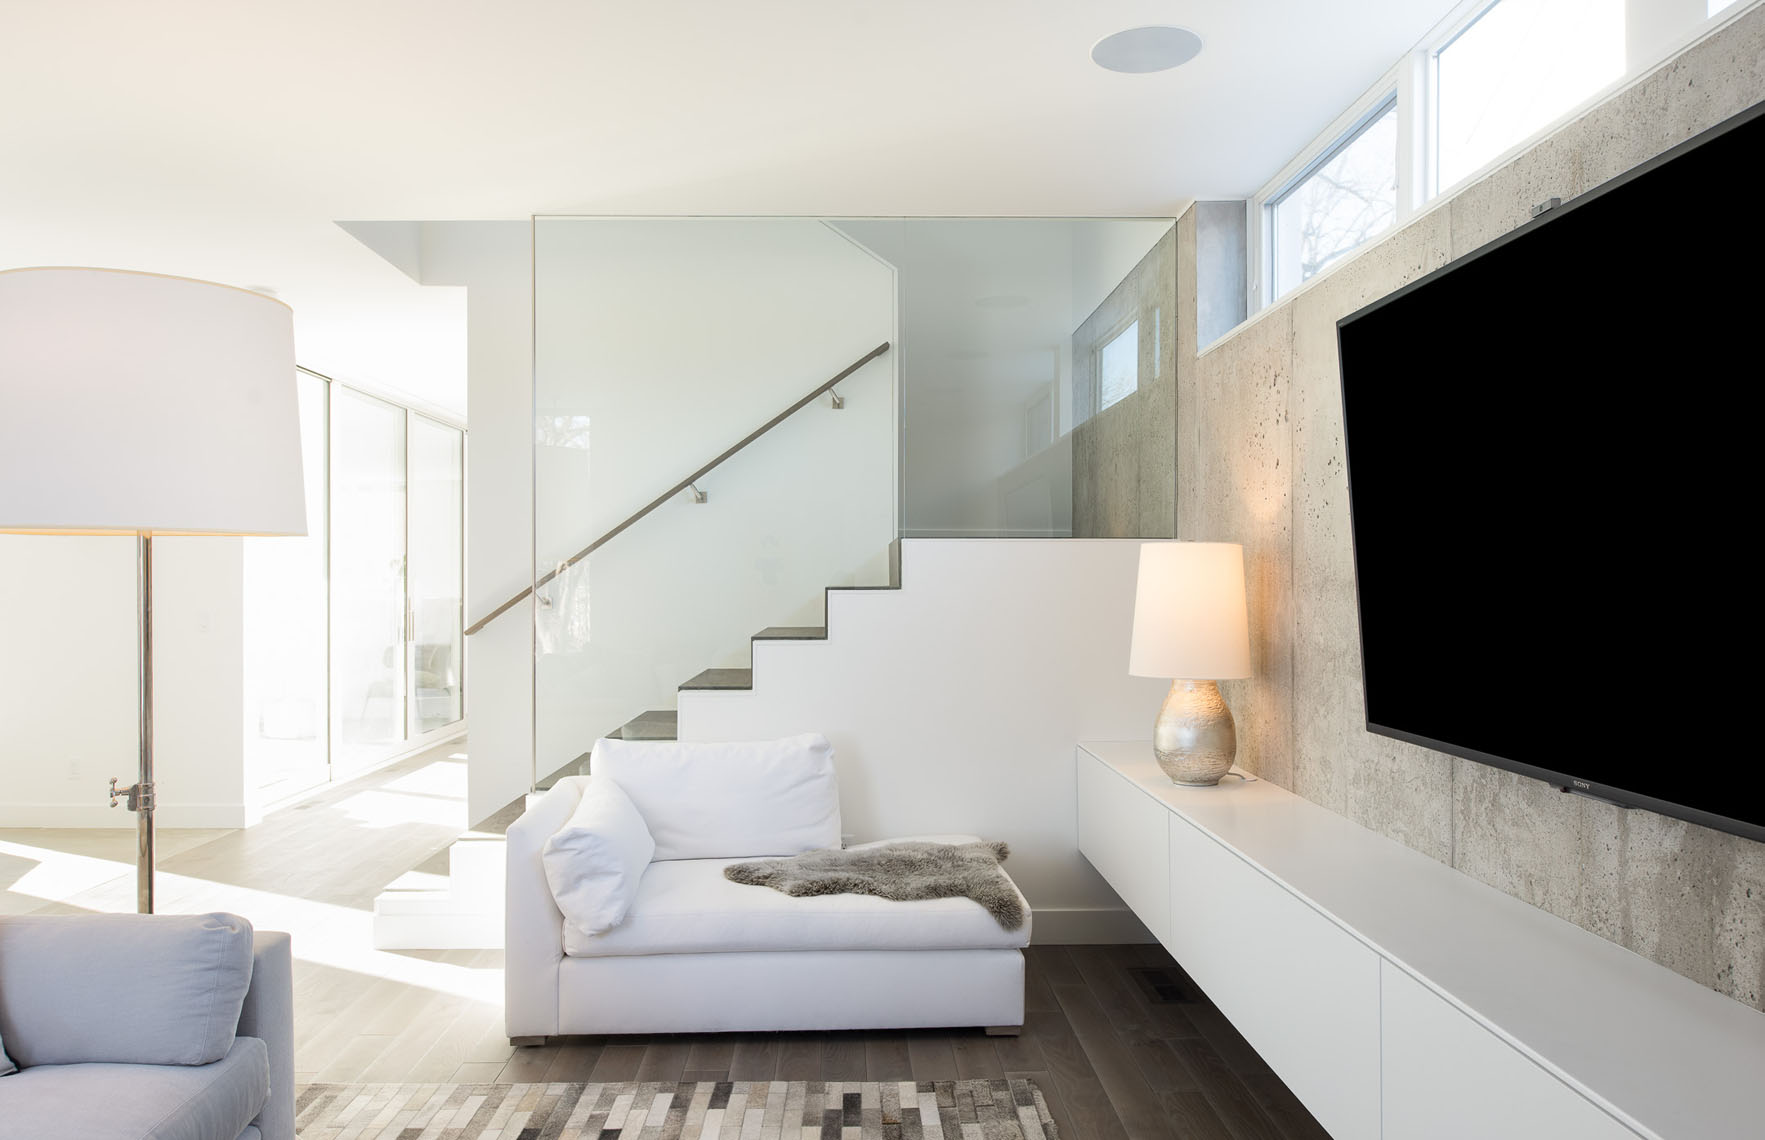 Modern living room with exposed concrete and a glass stair divider